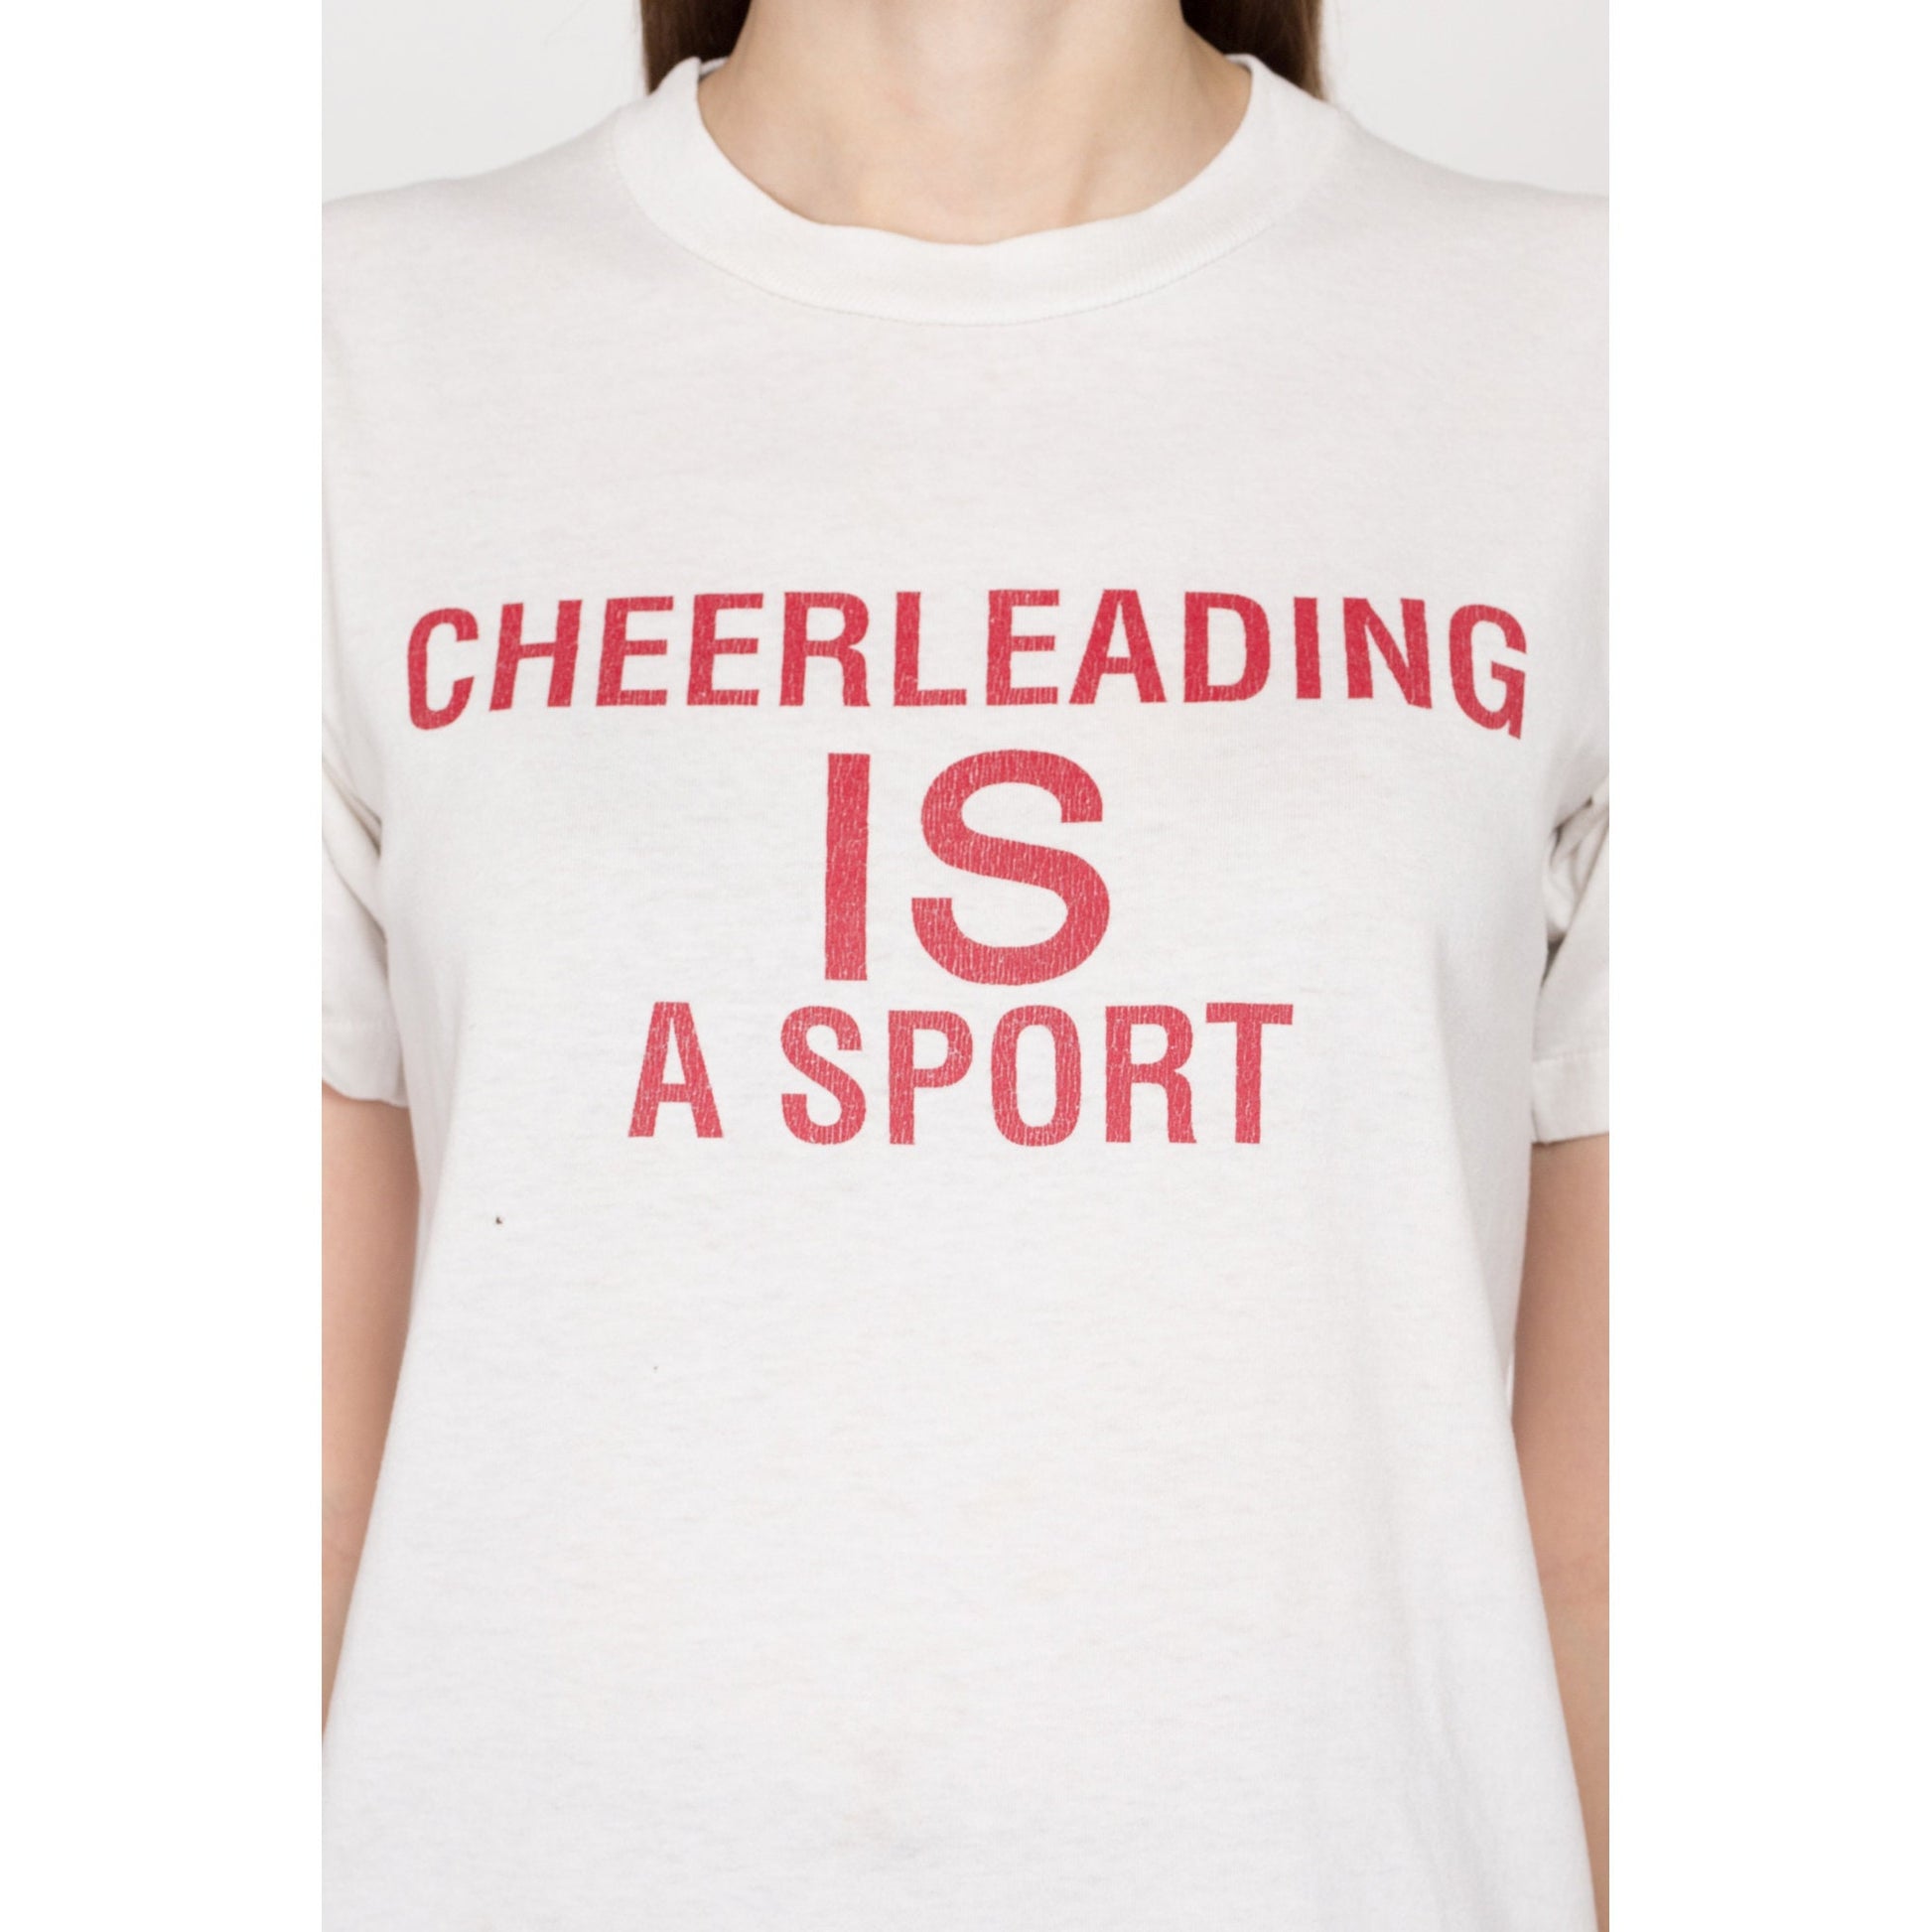 Small 90s "Cheerleading IS A Sport" T Shirt | Vintage White Cheerleader Graphic Tee